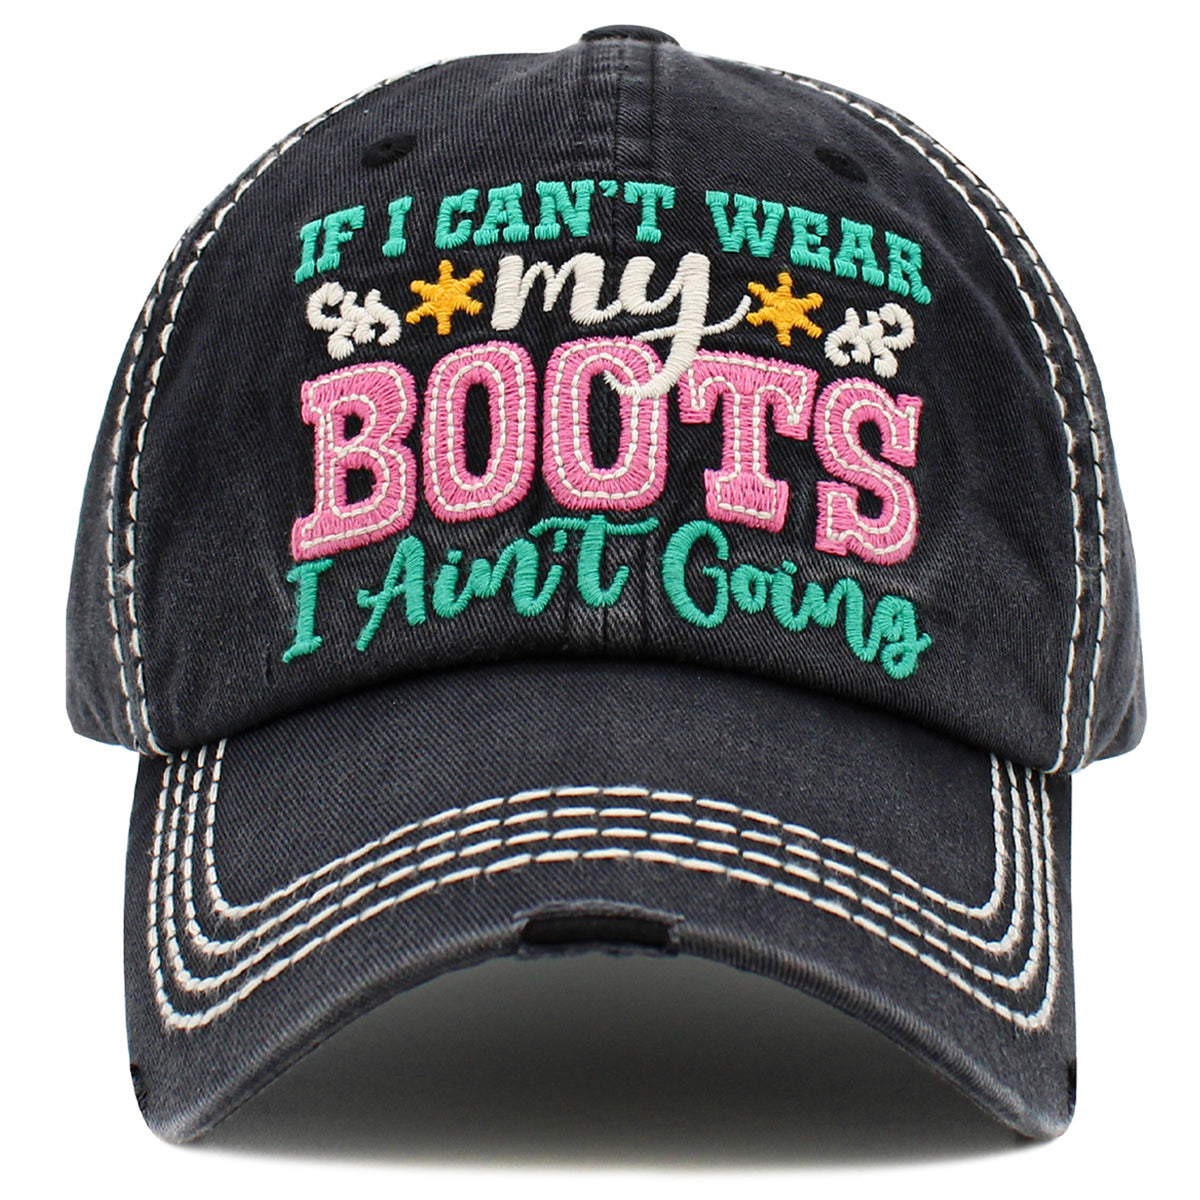 1498 - If I Can't Wear My Boots I Ain't Going Hat - Black